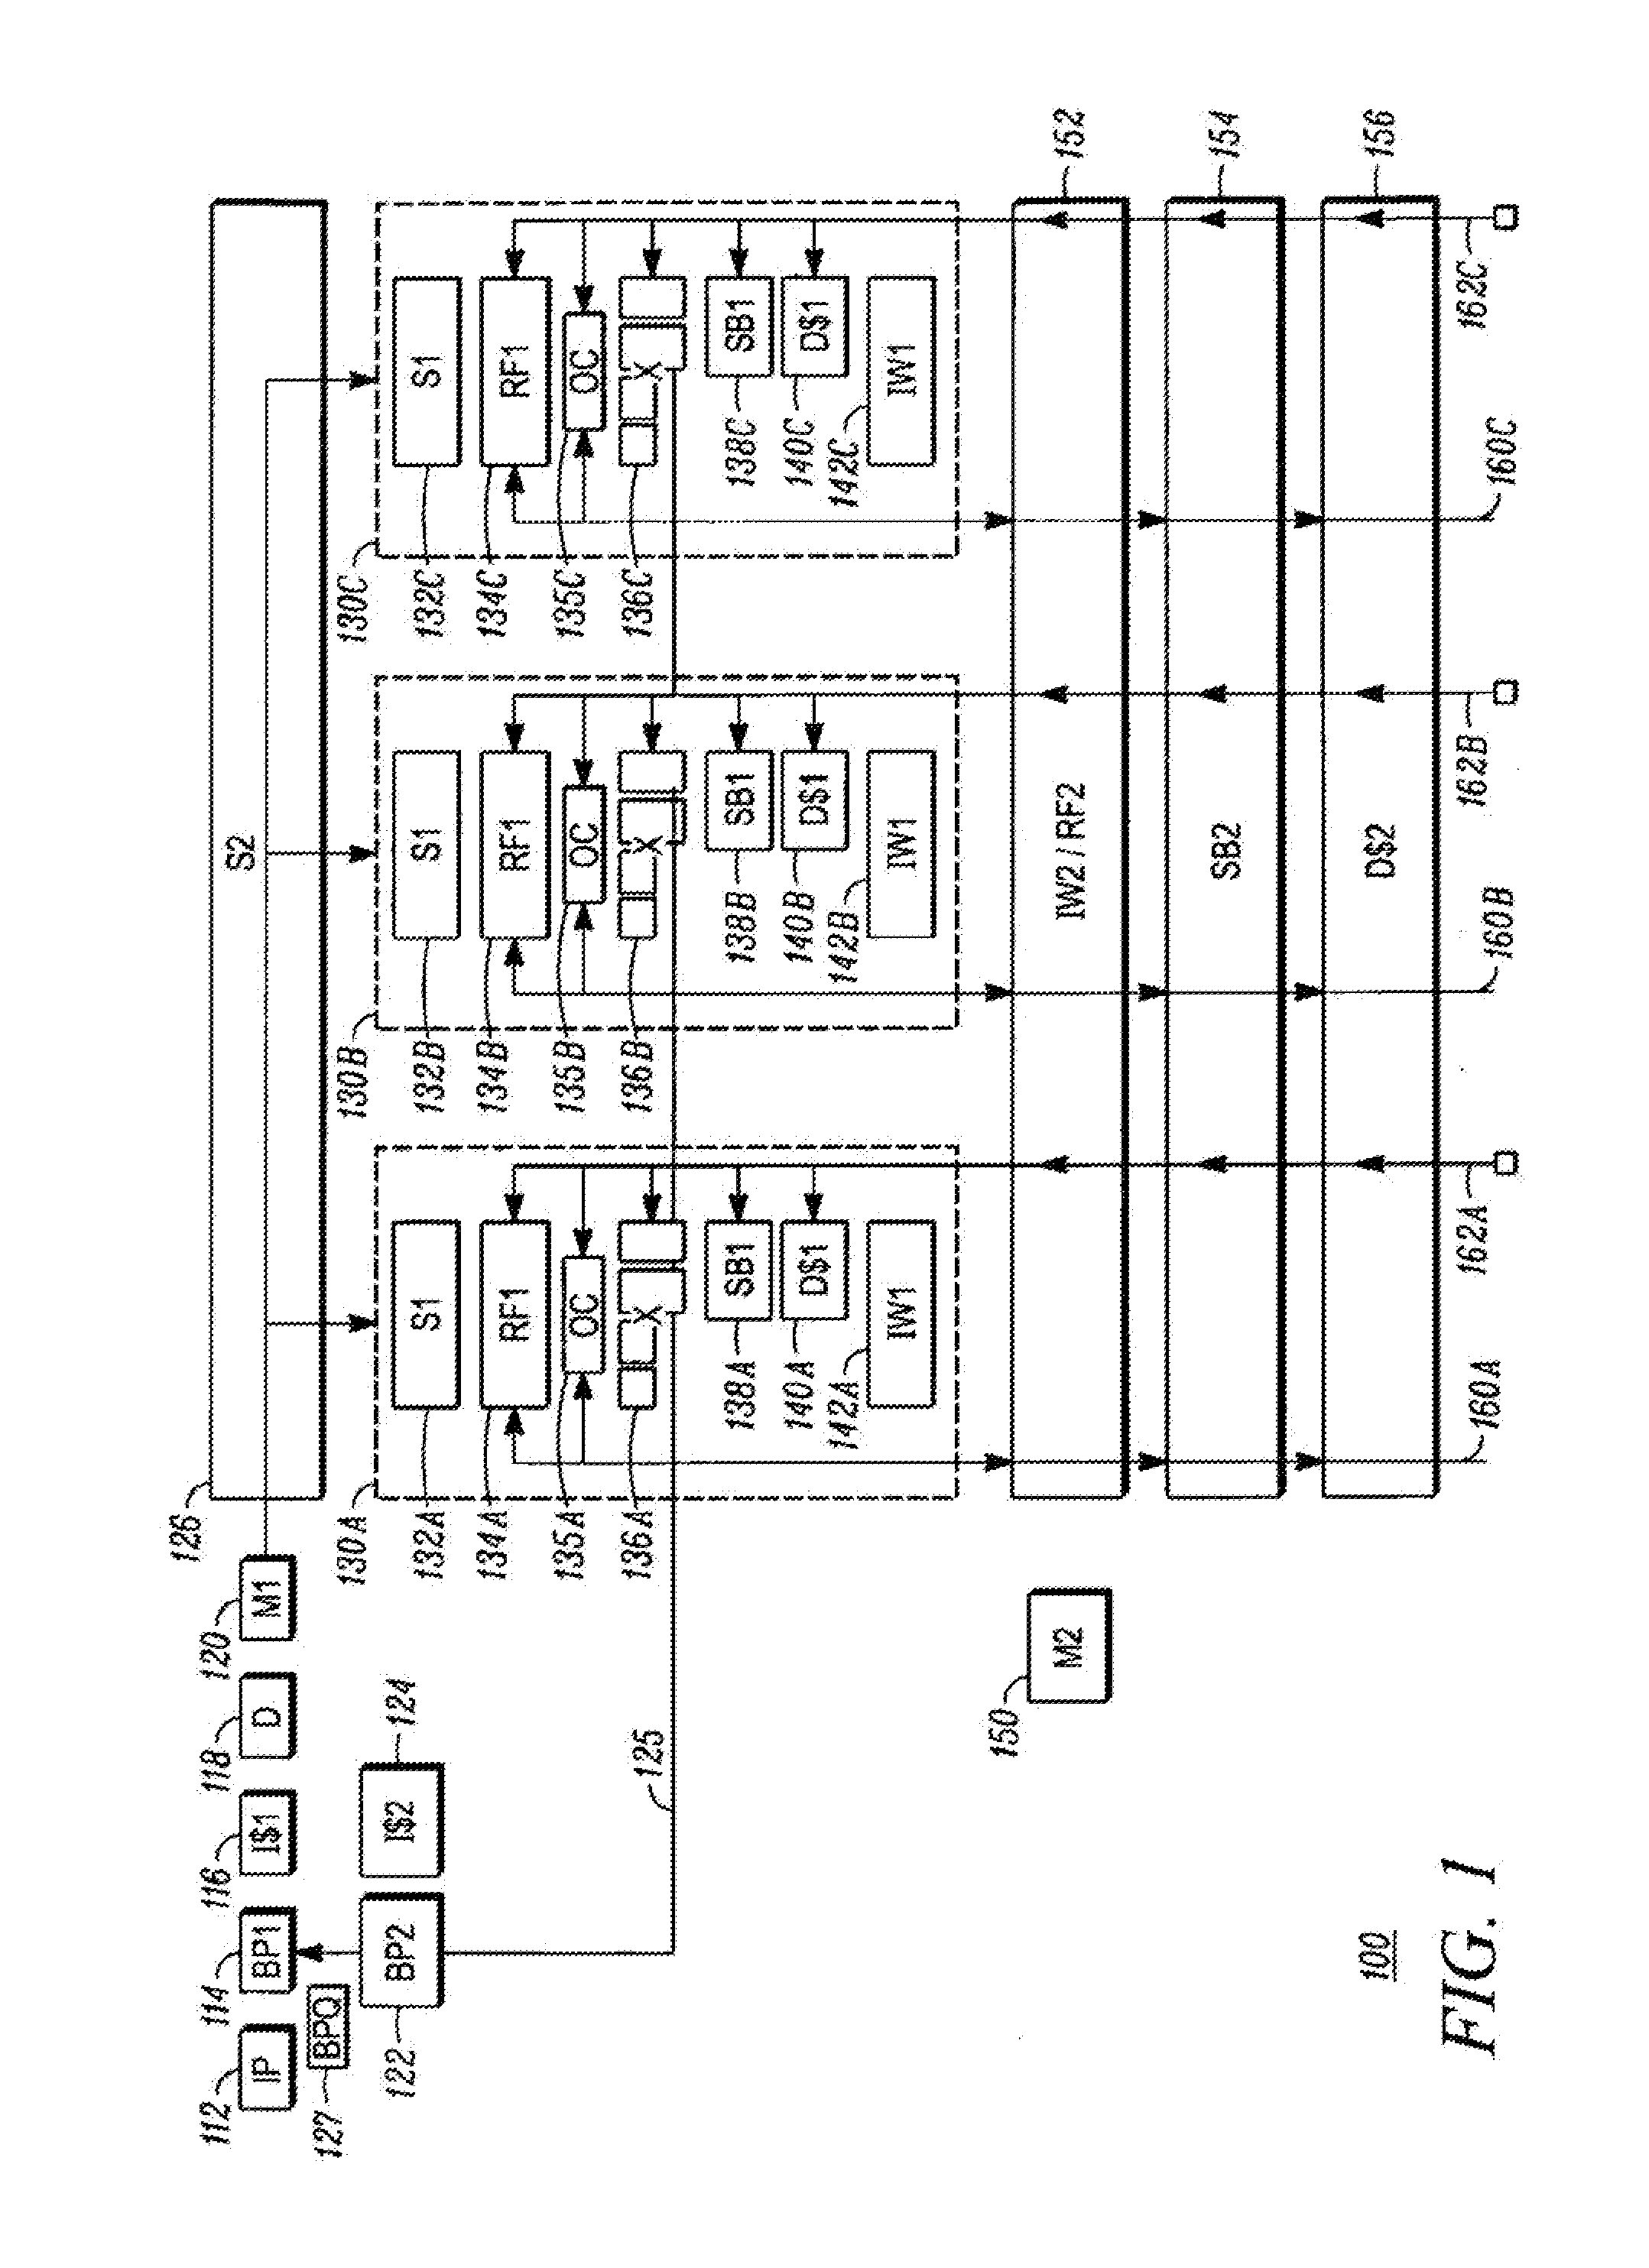 Method and apparatus for segmented sequential storage